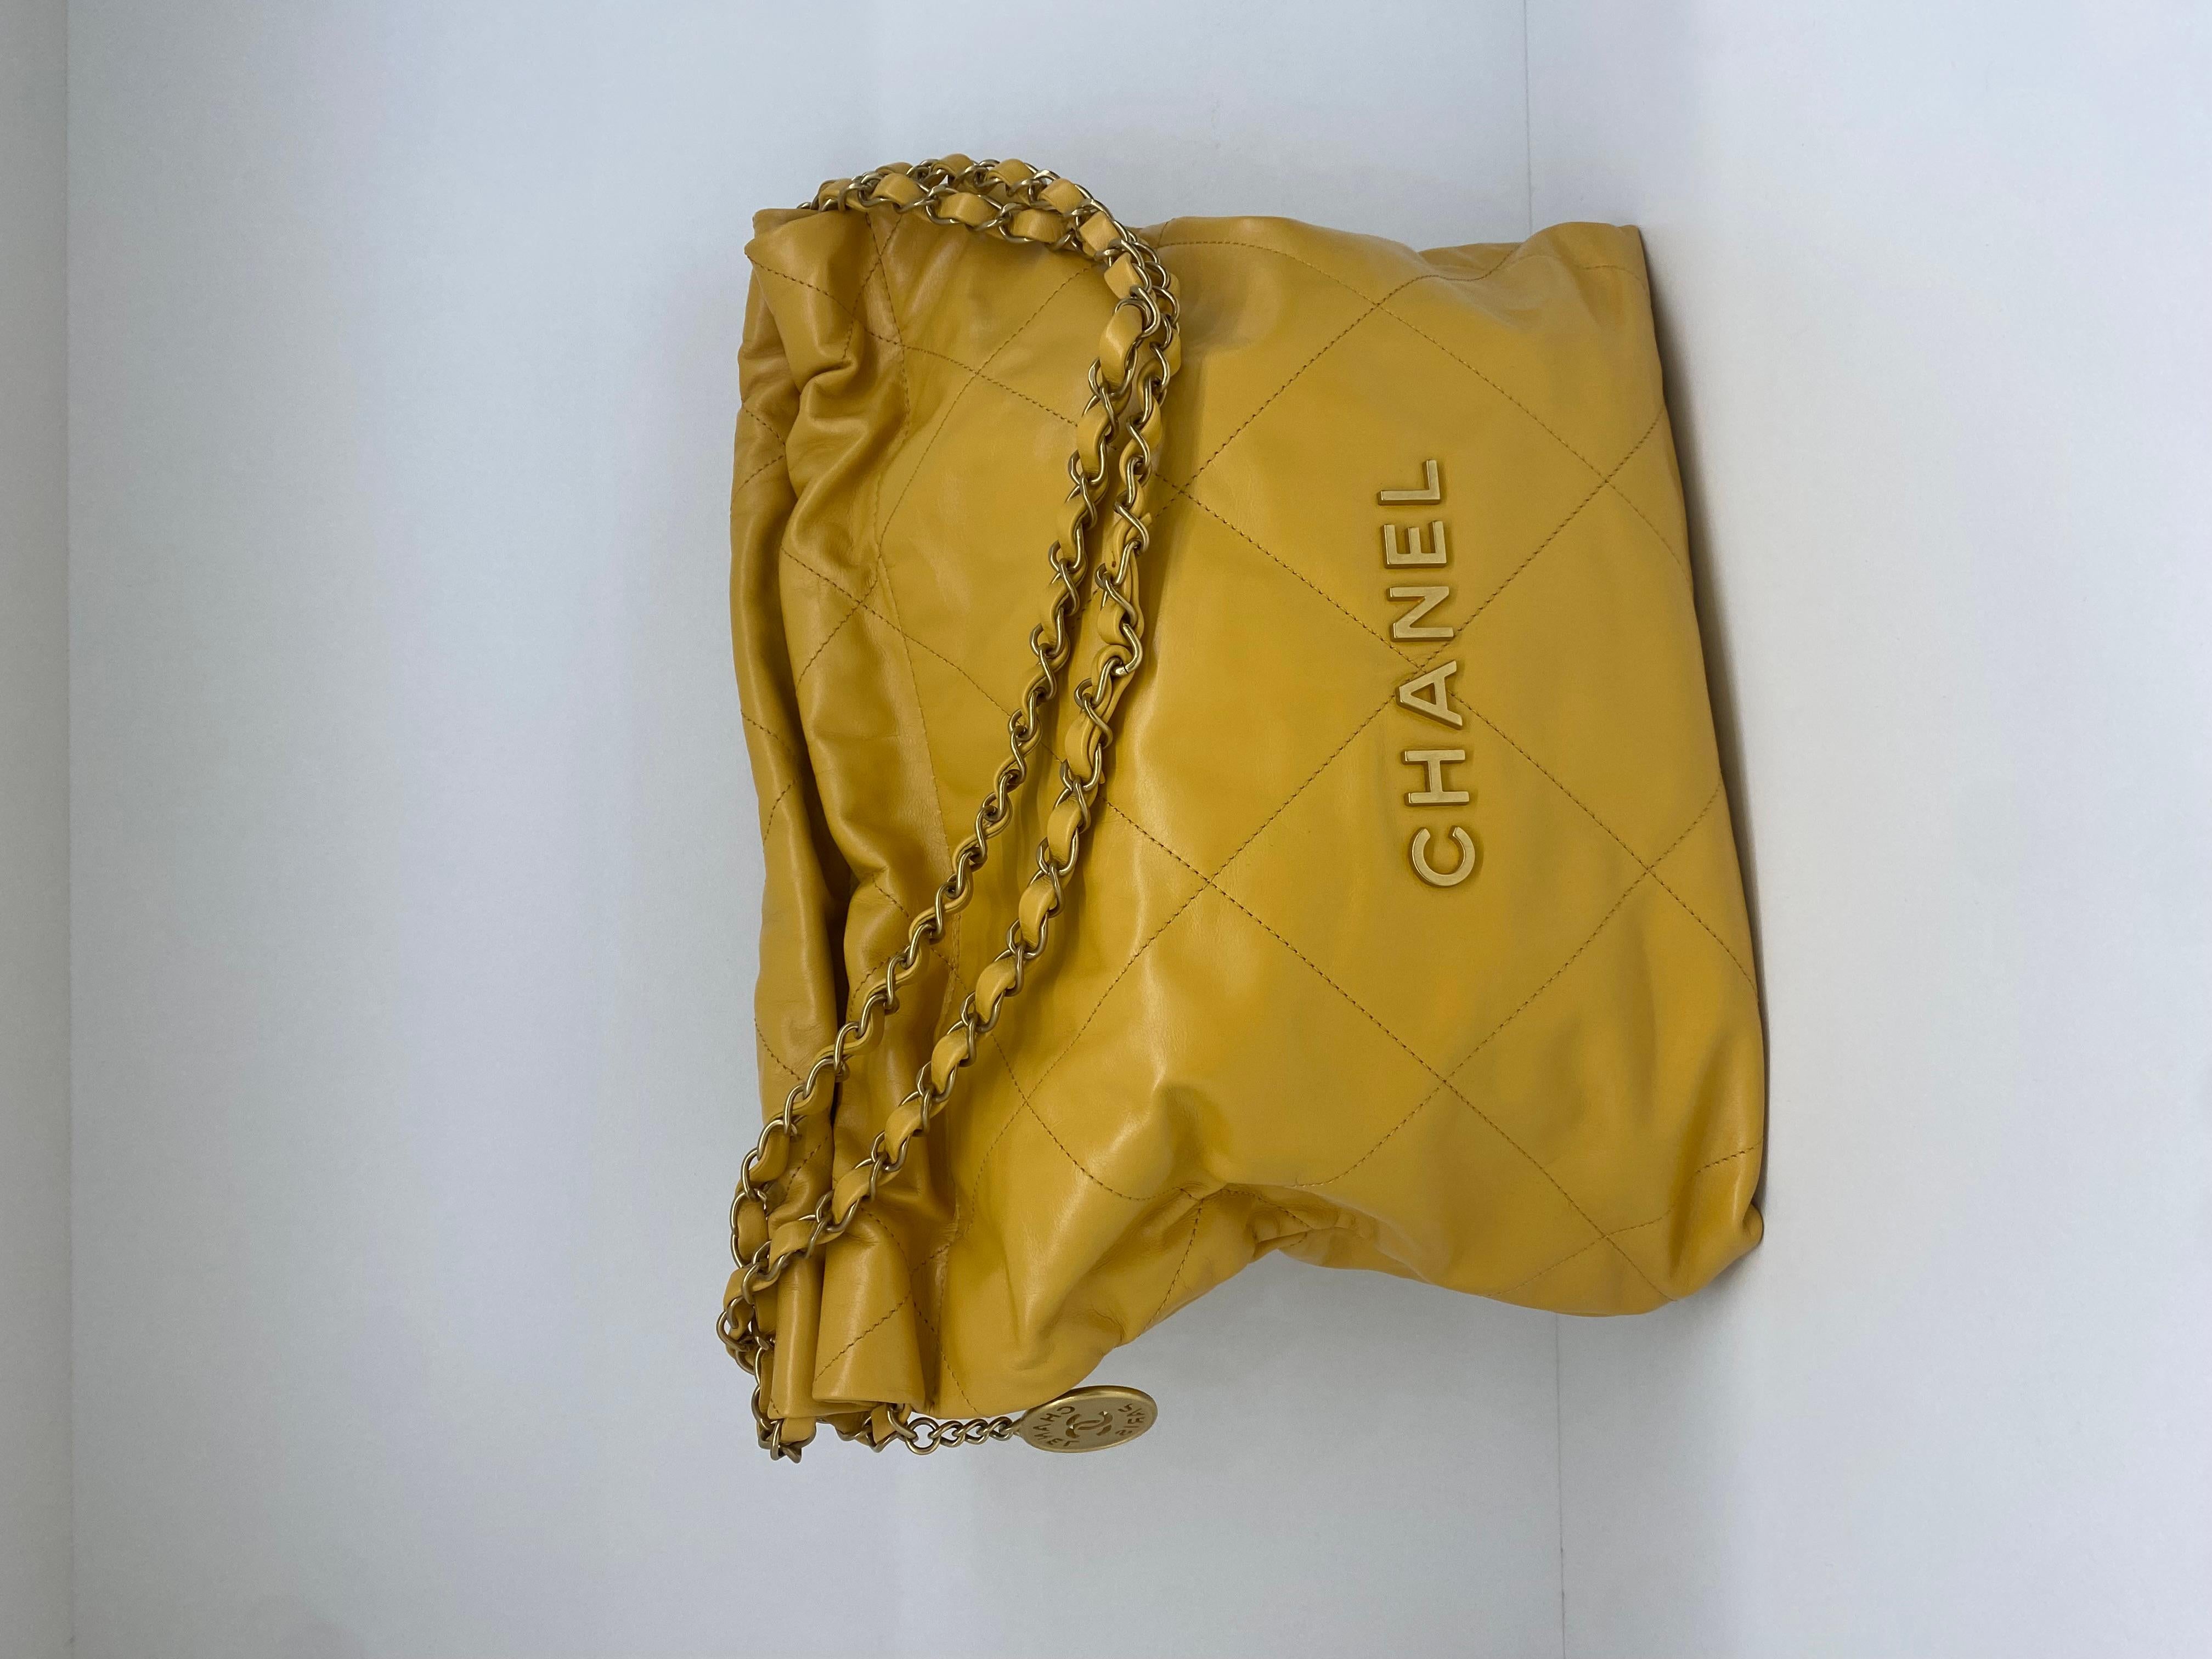 Chanel 22 Handbag Medium Yellow GHW  In Excellent Condition For Sale In Double Bay, AU